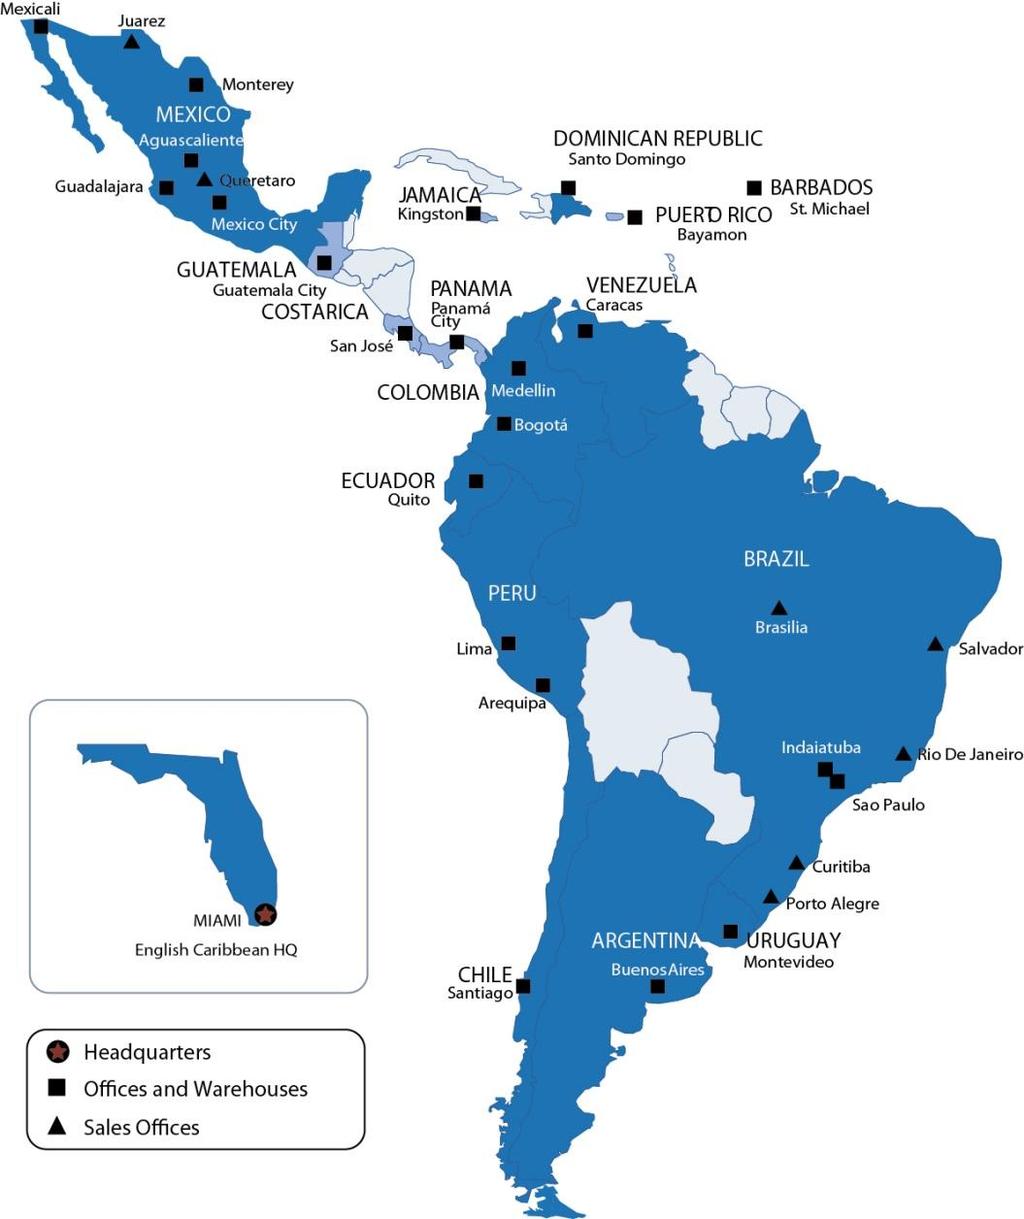 ANIXTER S PRESENCE: CENTRAL & LATIN AMERICA (CALA) Entered region in 1990 15 Countries 800 Employees 2012 Revenue $561.